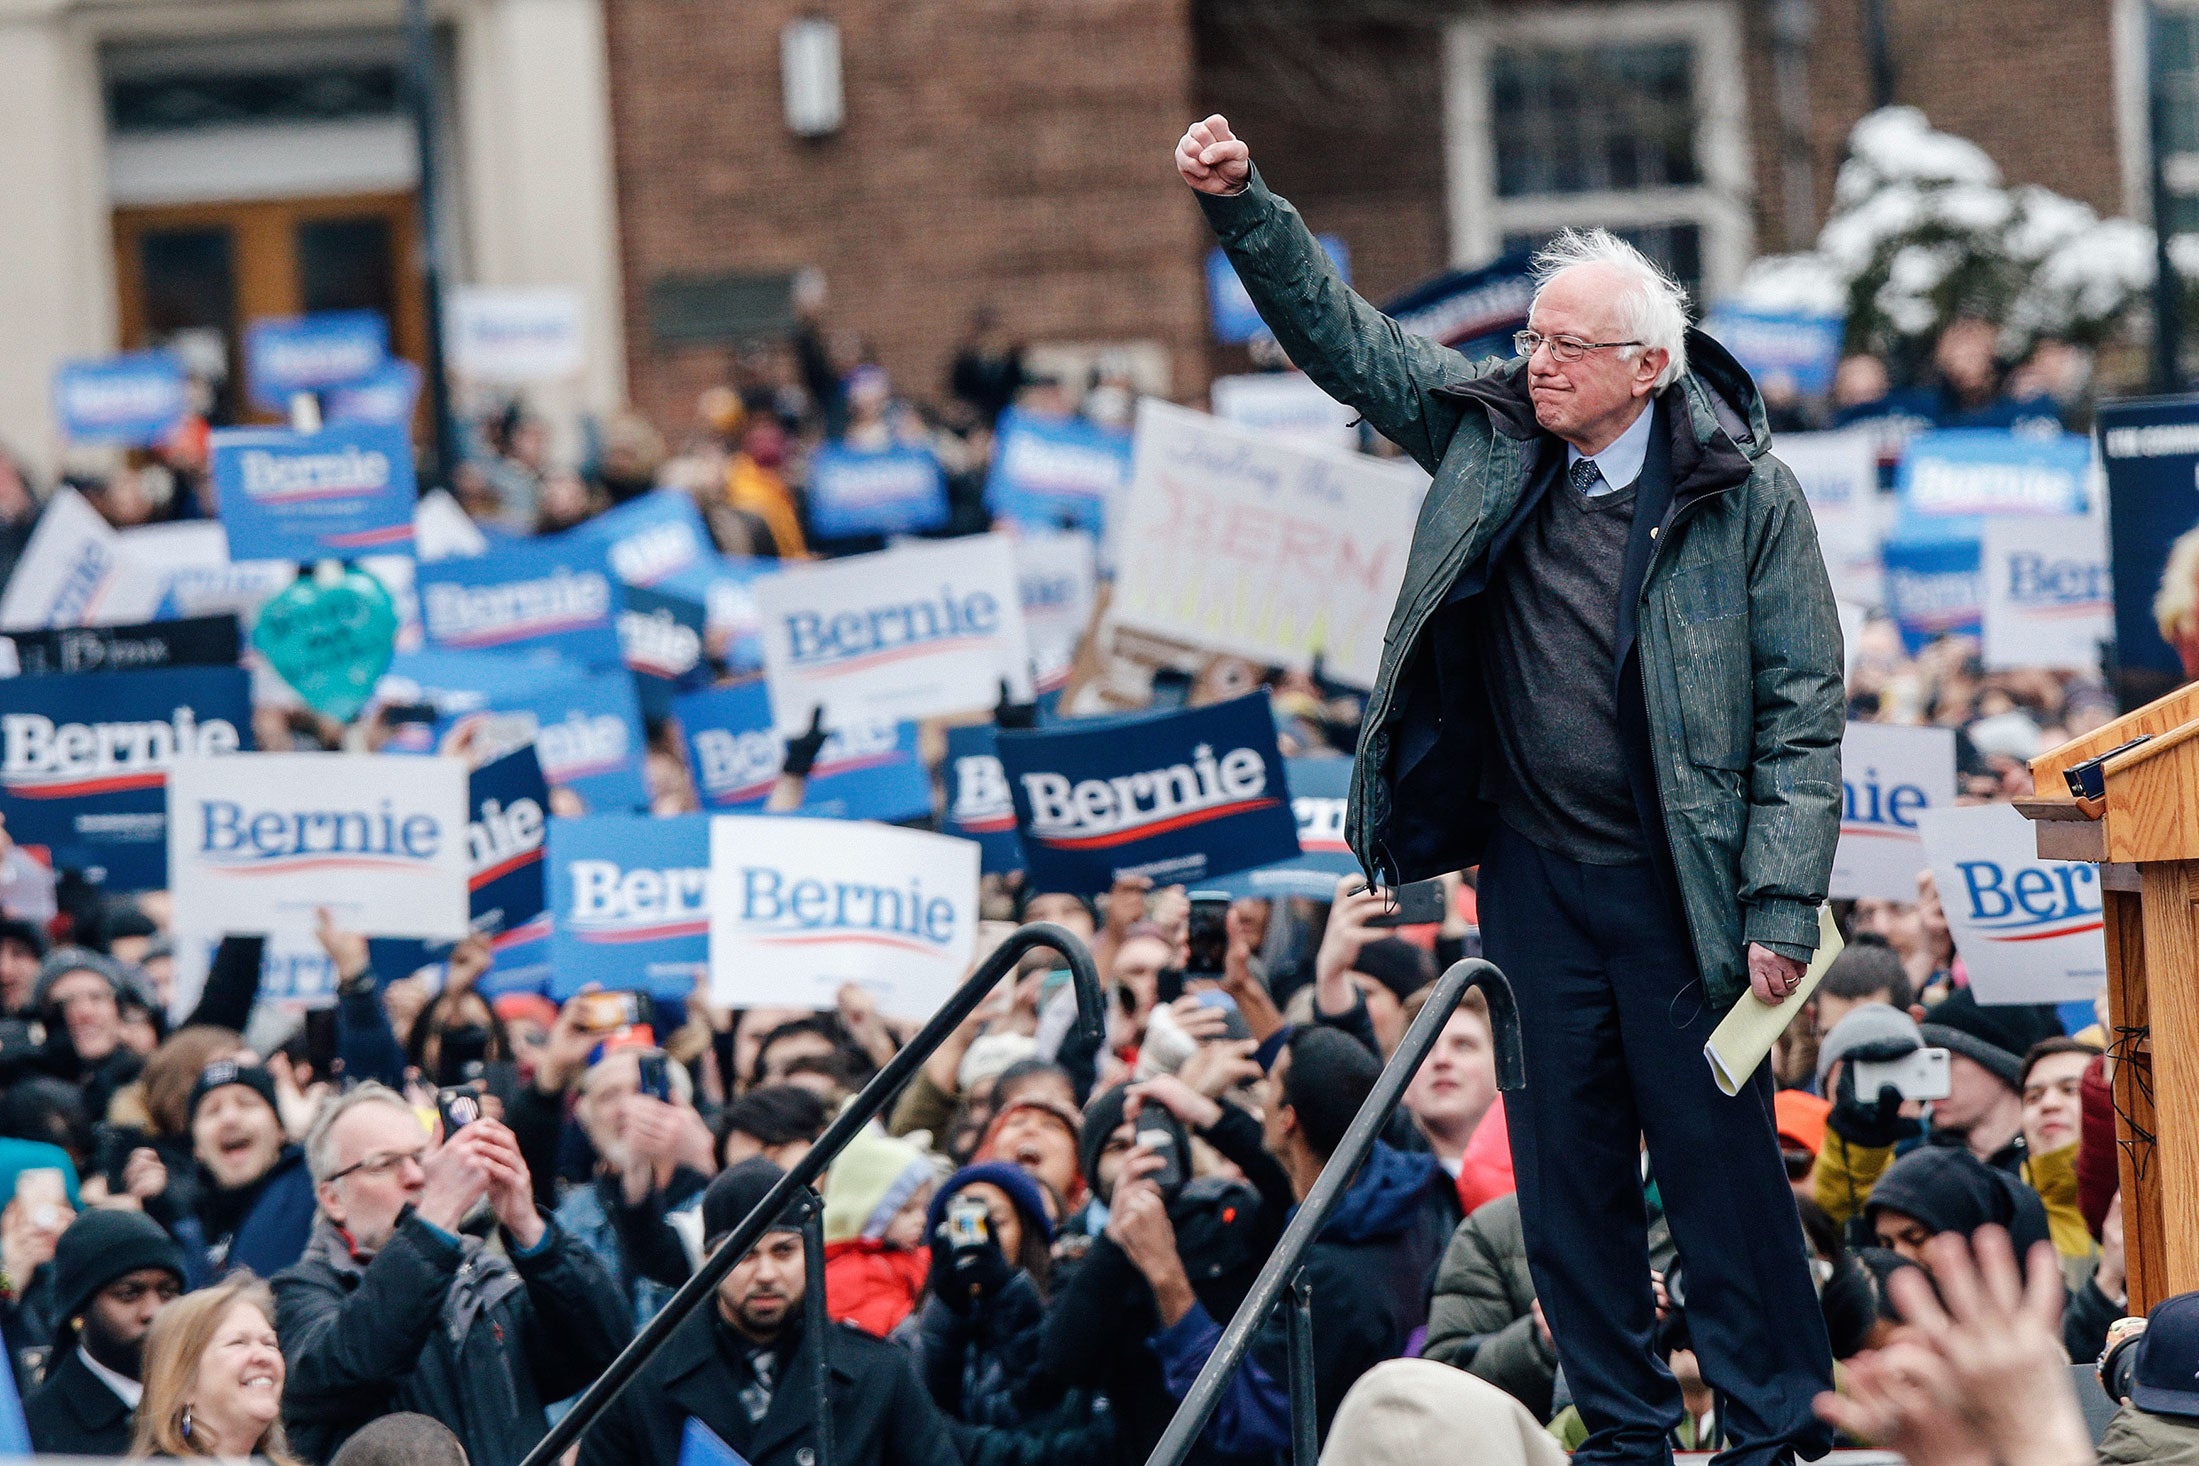 Bernie Sanders raising a fist of solidarity surrounded by campaign supporters.